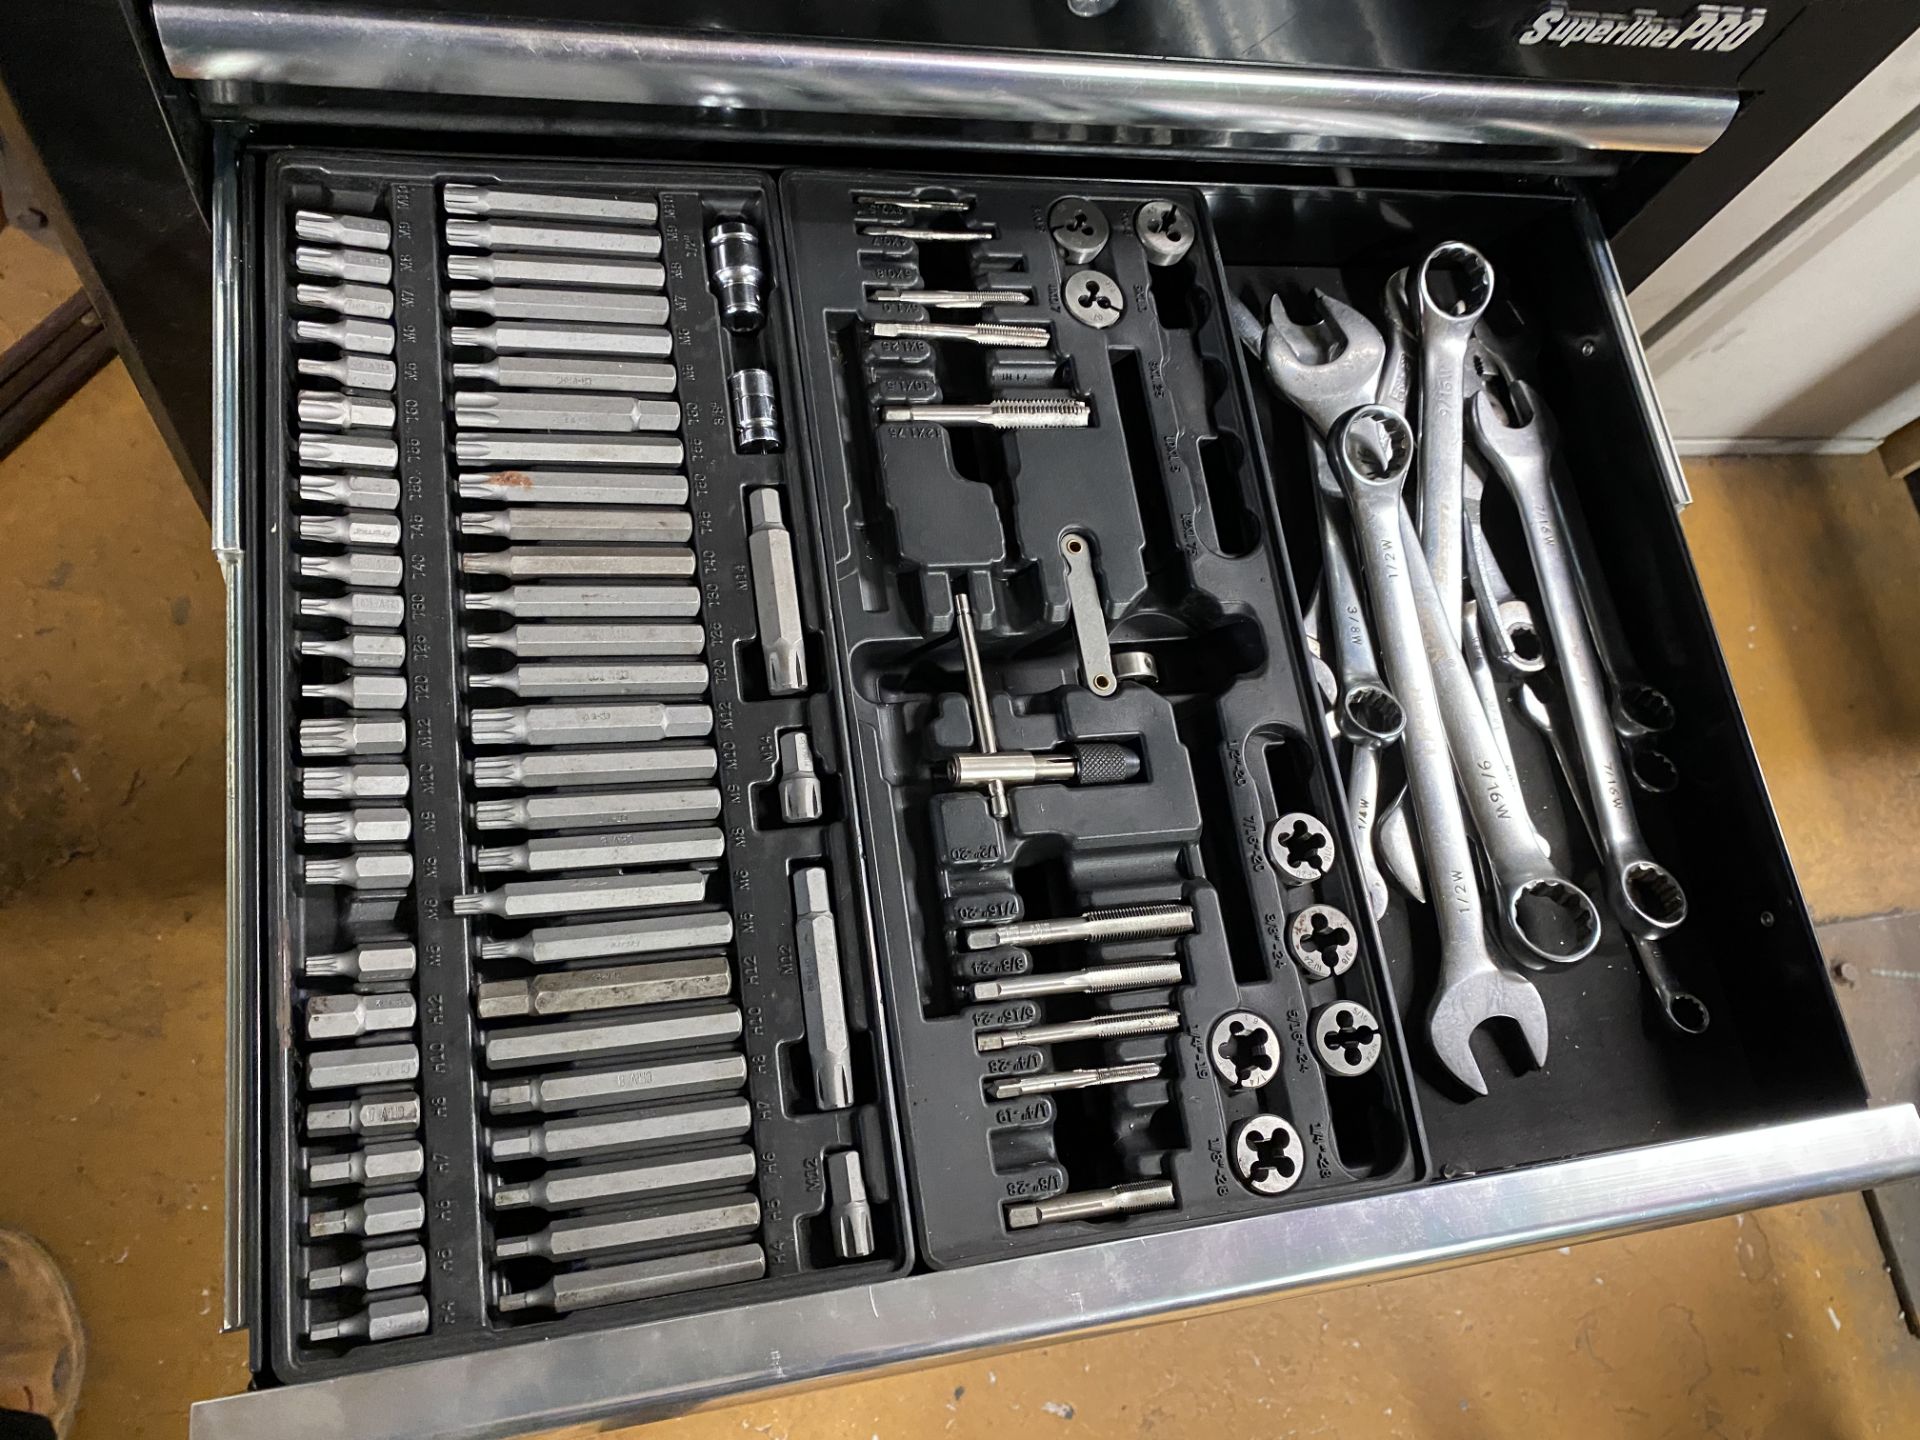 Sealey SuperLine Pro Multi Drawer Tool Chest with Comprehensive Tool Kit, Comprising Sockets, Ratche - Image 14 of 21